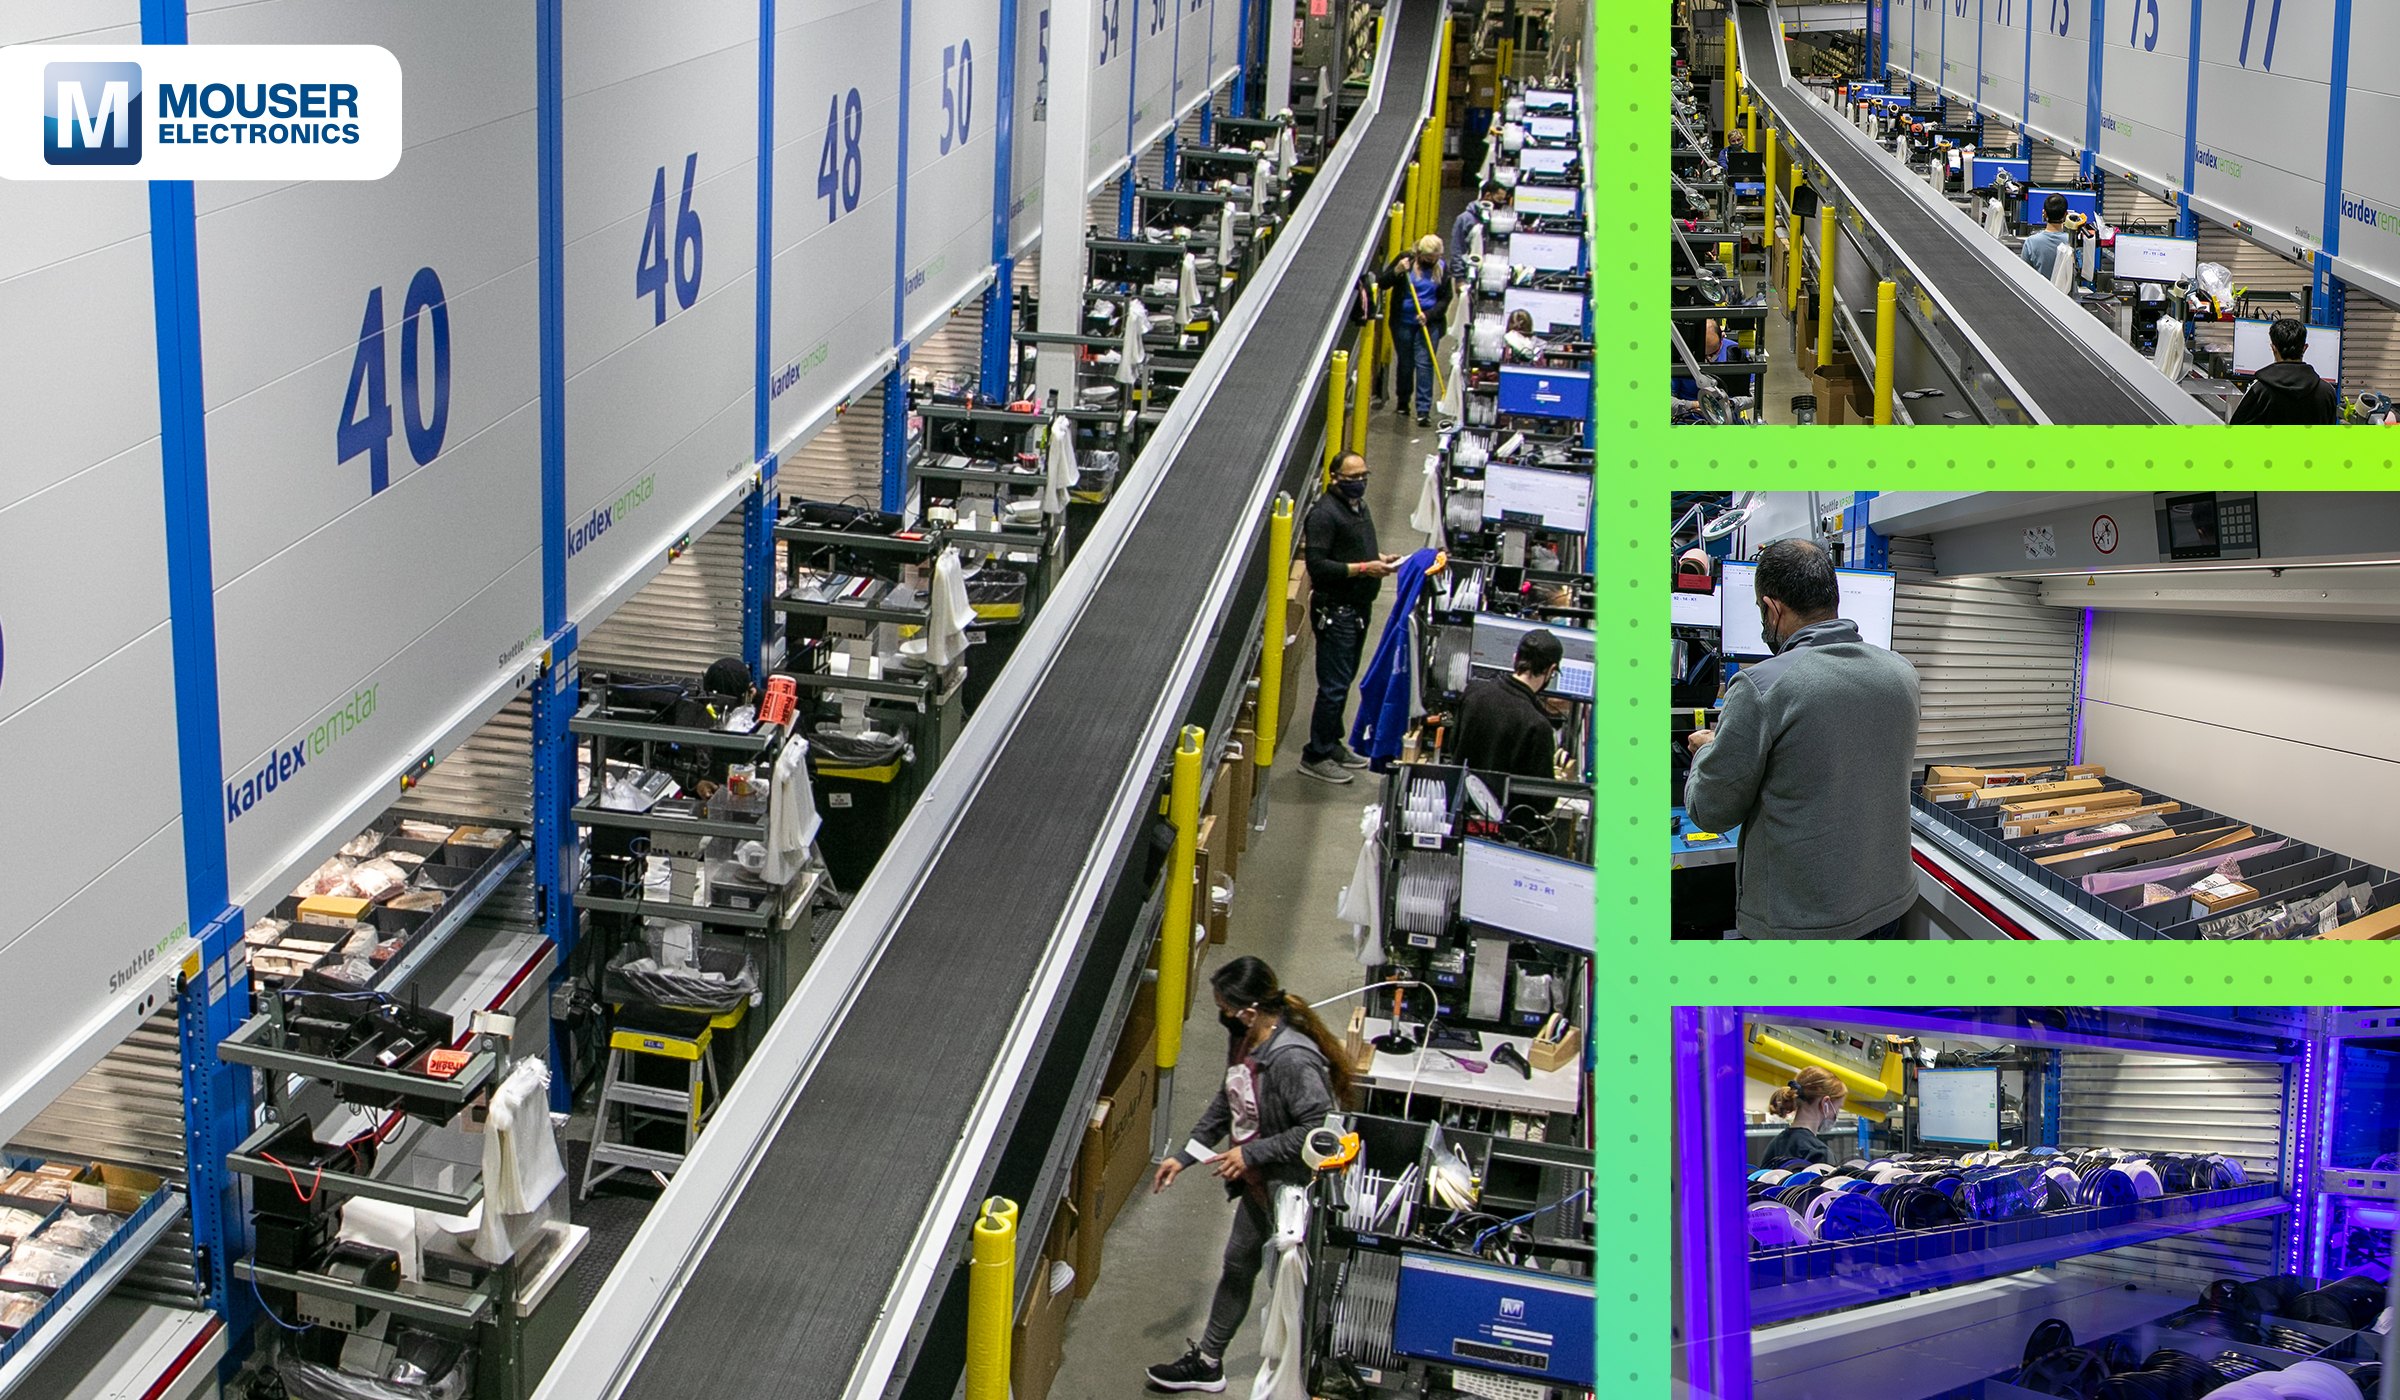 Mouser Electronics' State-of-the-Art Distribution Center Features